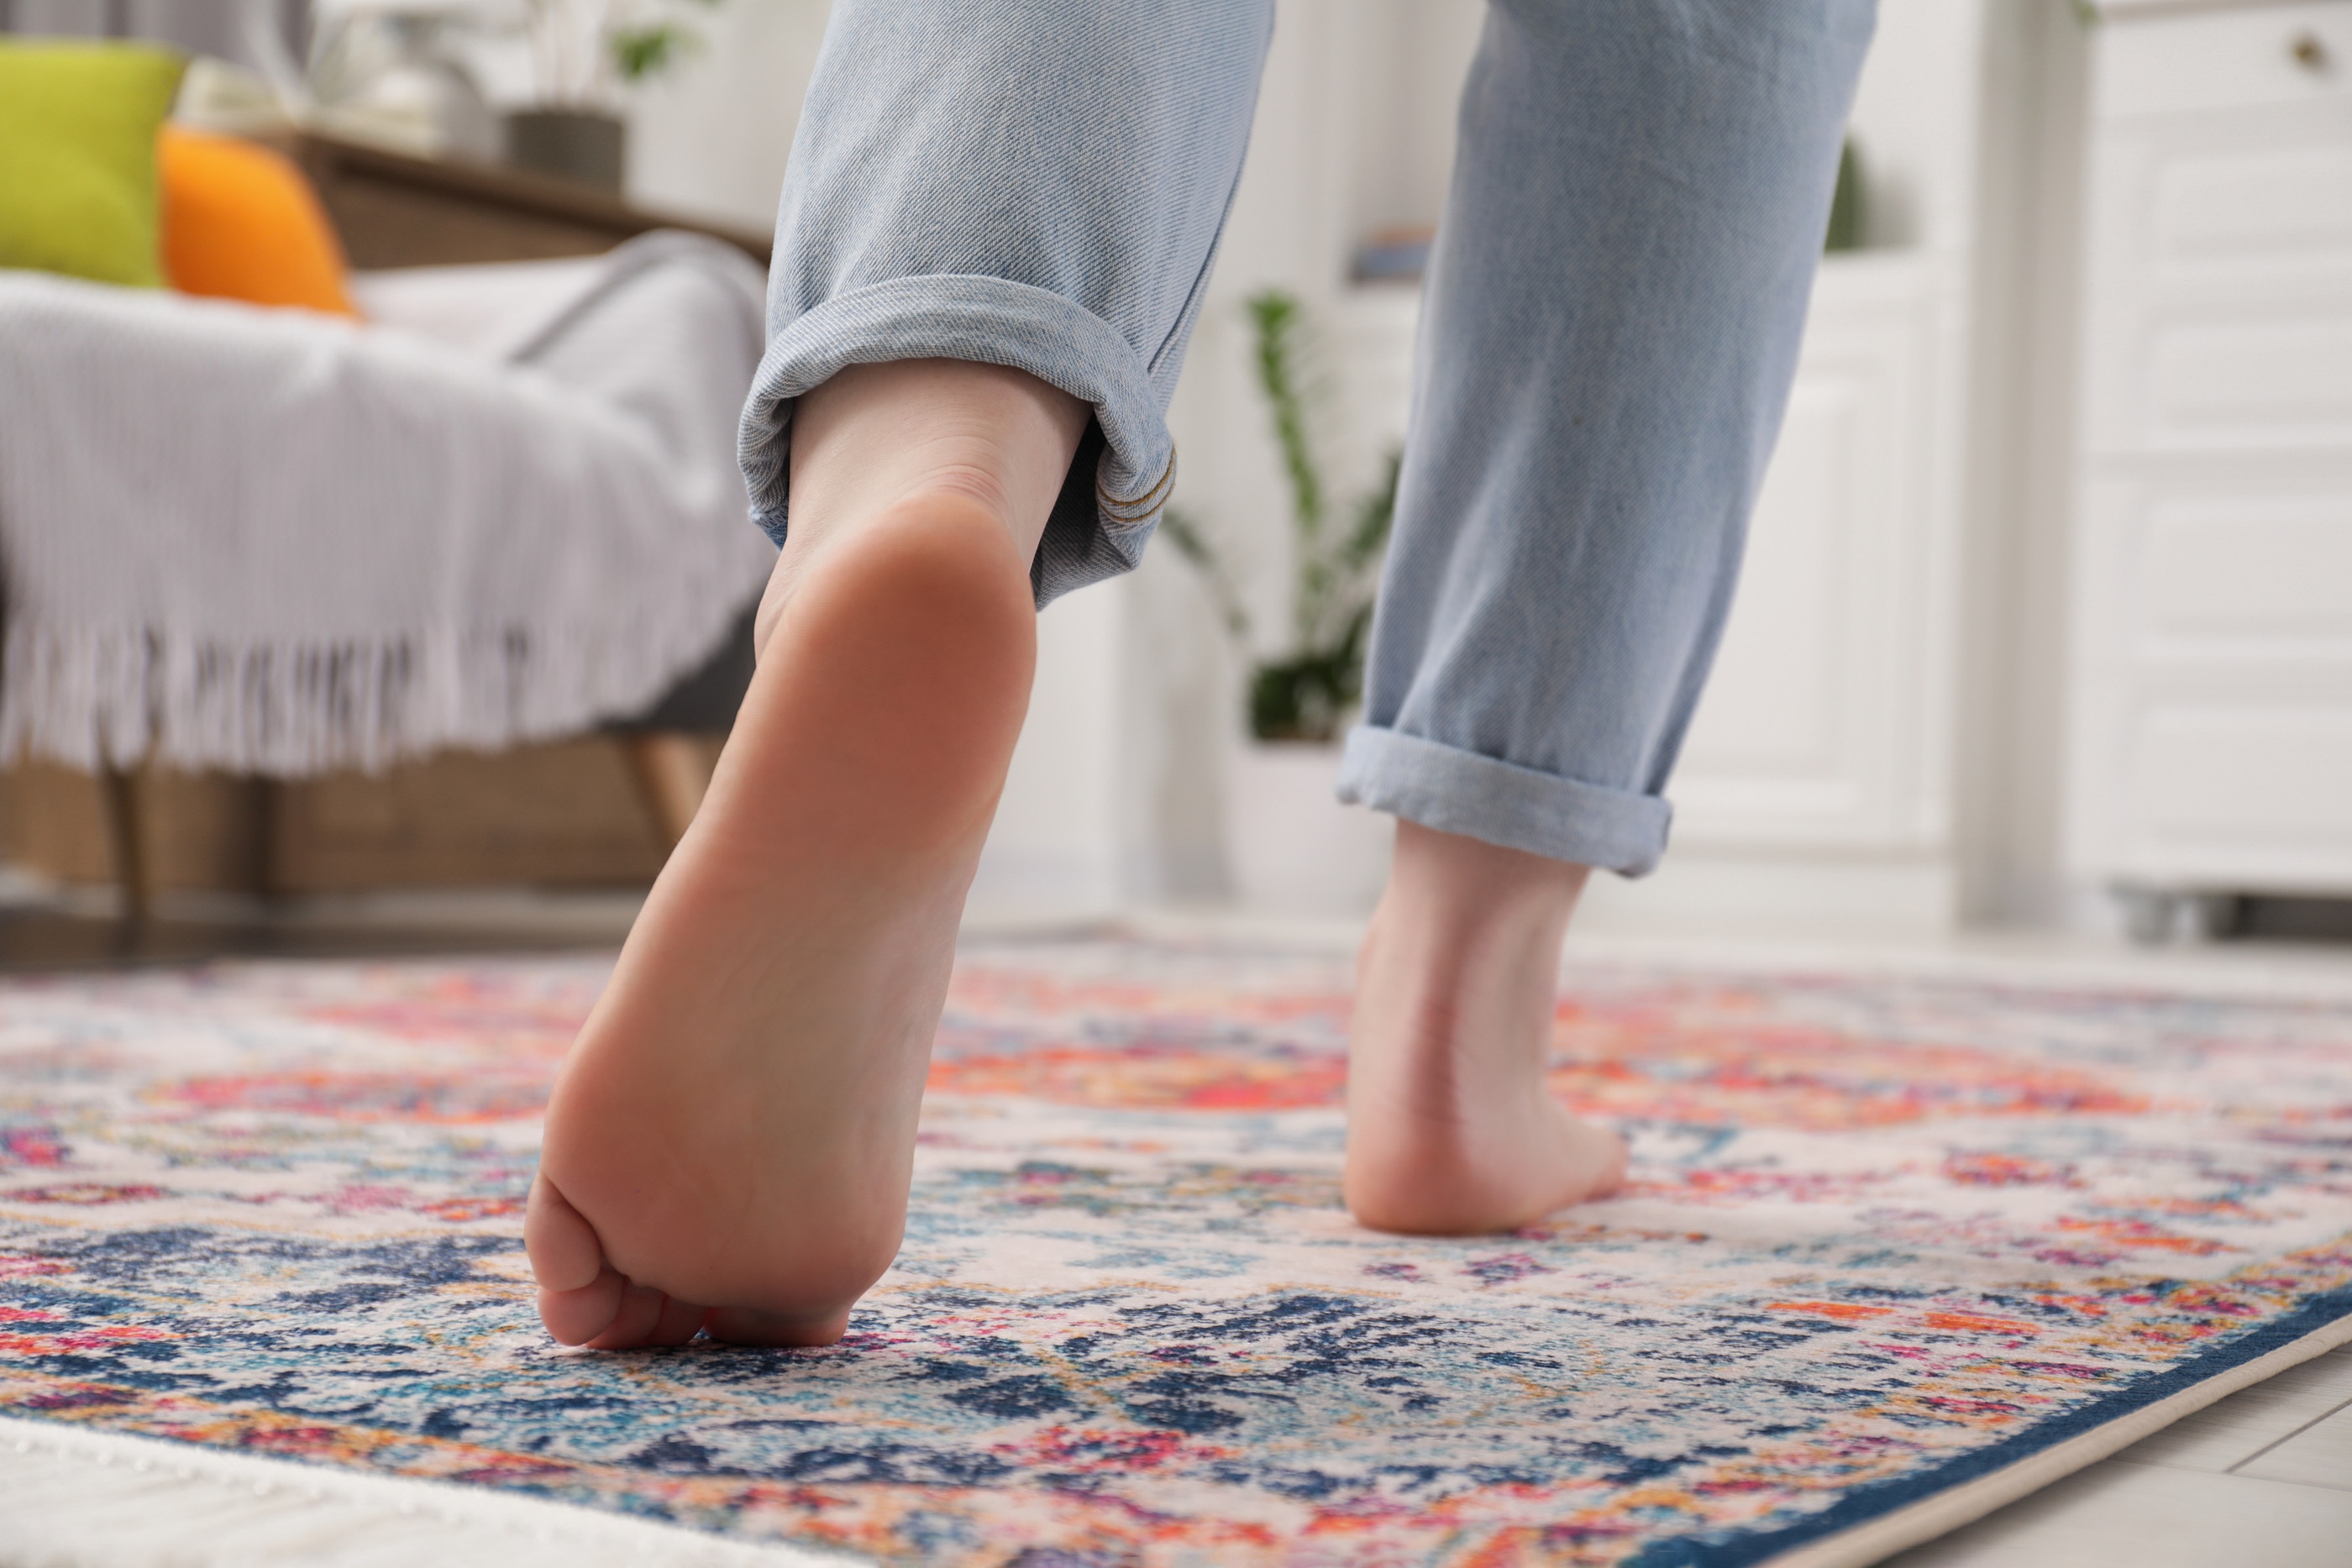 Rug Cleaning 101: How Often Should You Clean Your Rug?